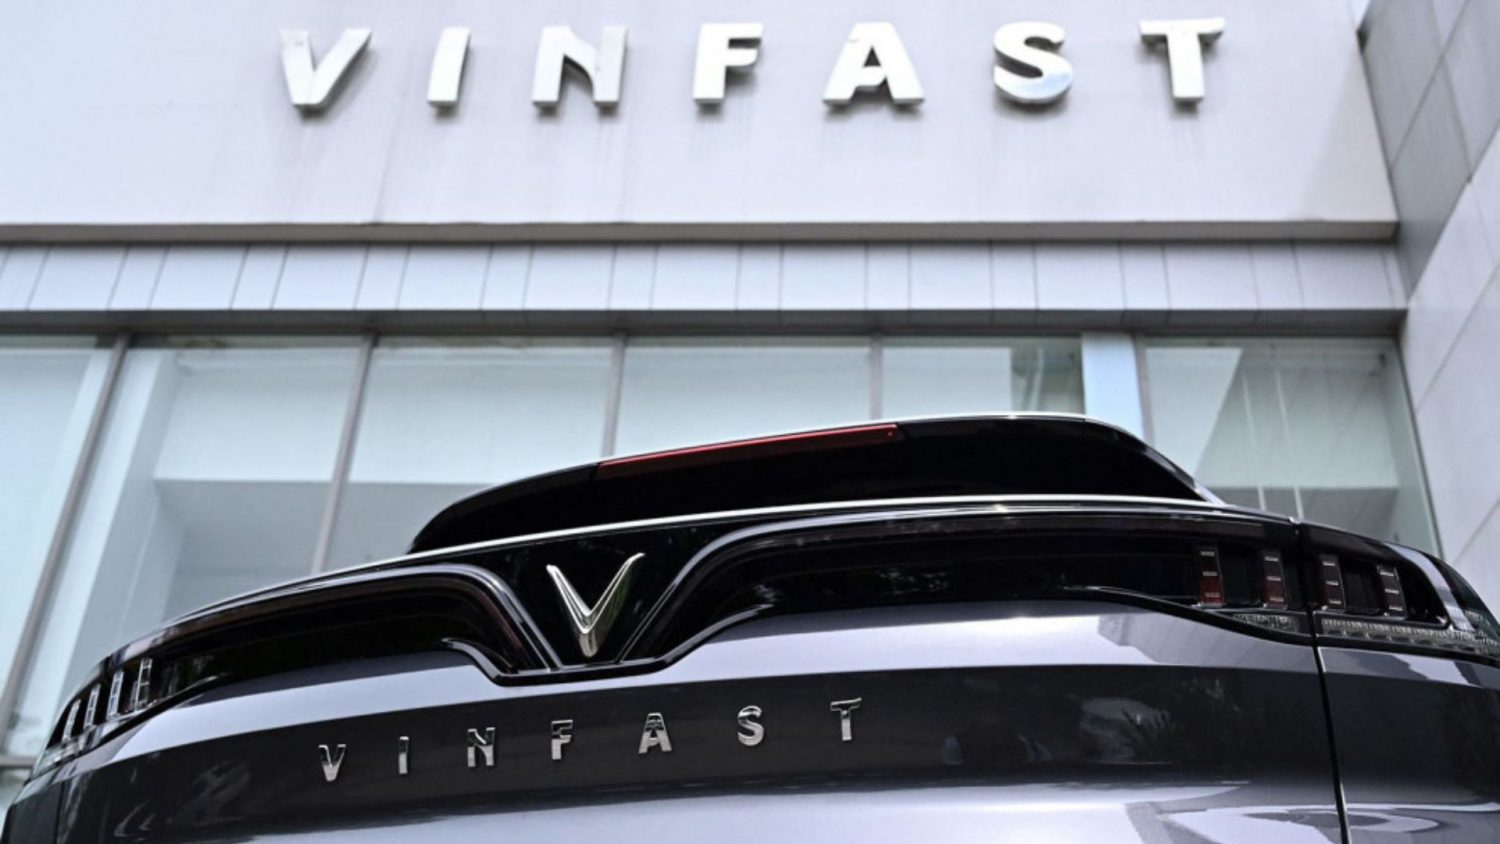 VinFast, founded and primarily controlled by Pham Nhat Vuong, Vietnam's richest man, made an impressive Nasdaq debut in mid-August.